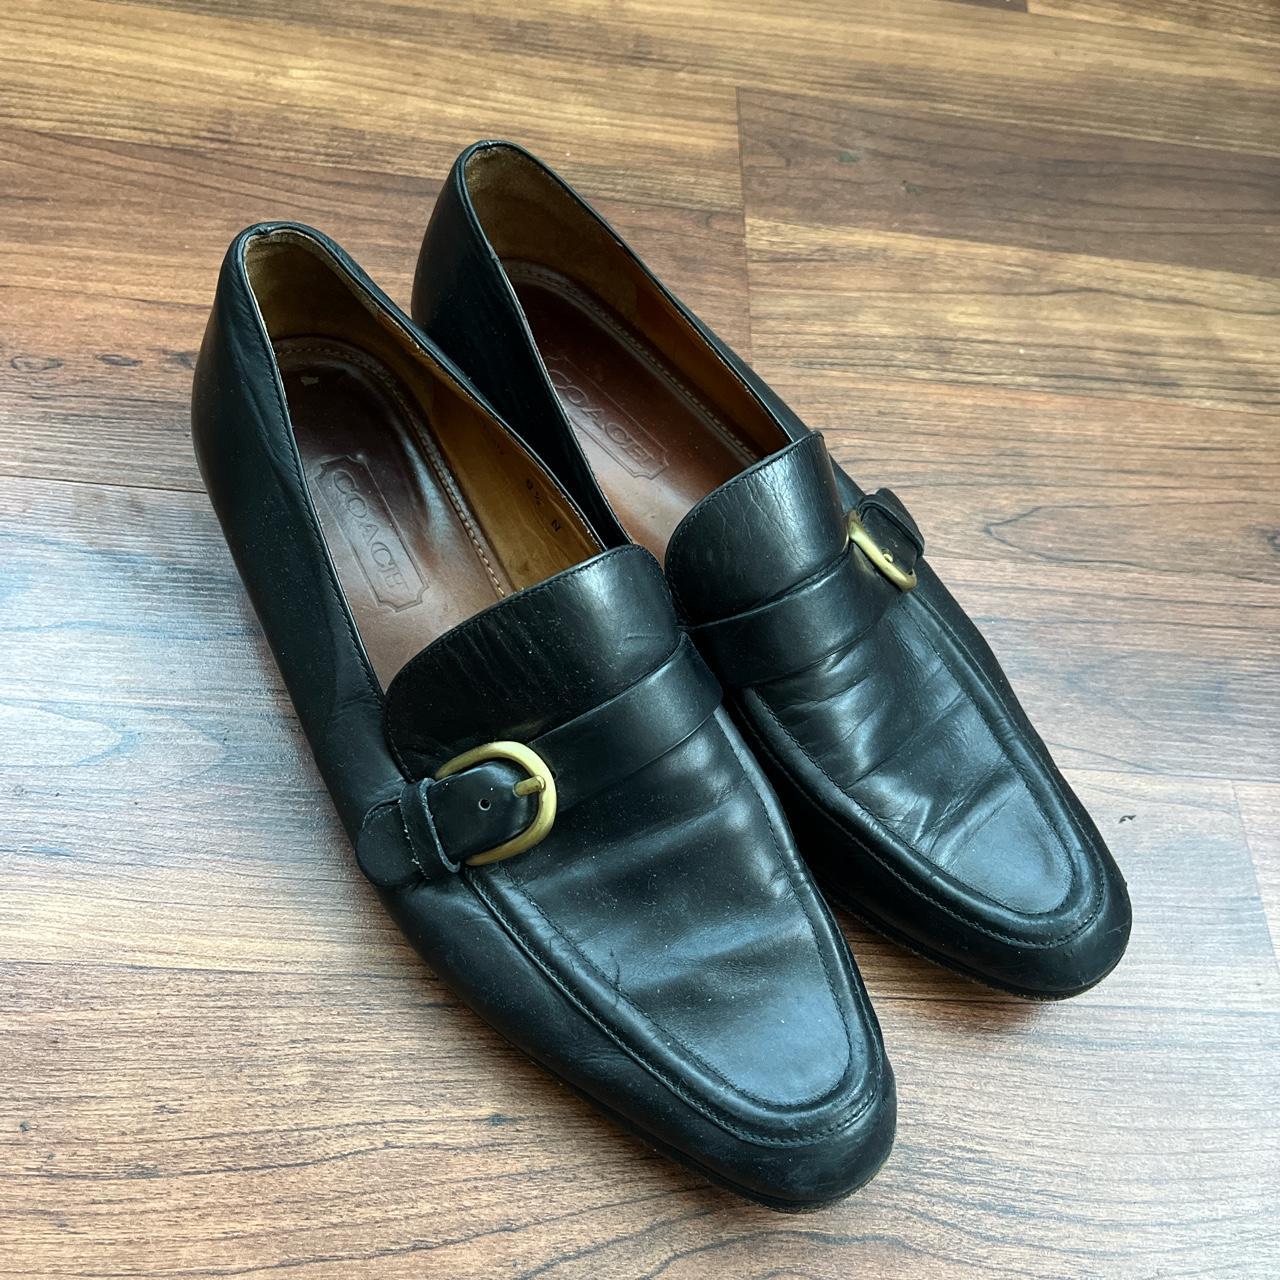 Vintage Coach Loafers - Real Italian Leather Size 8.5 - Depop